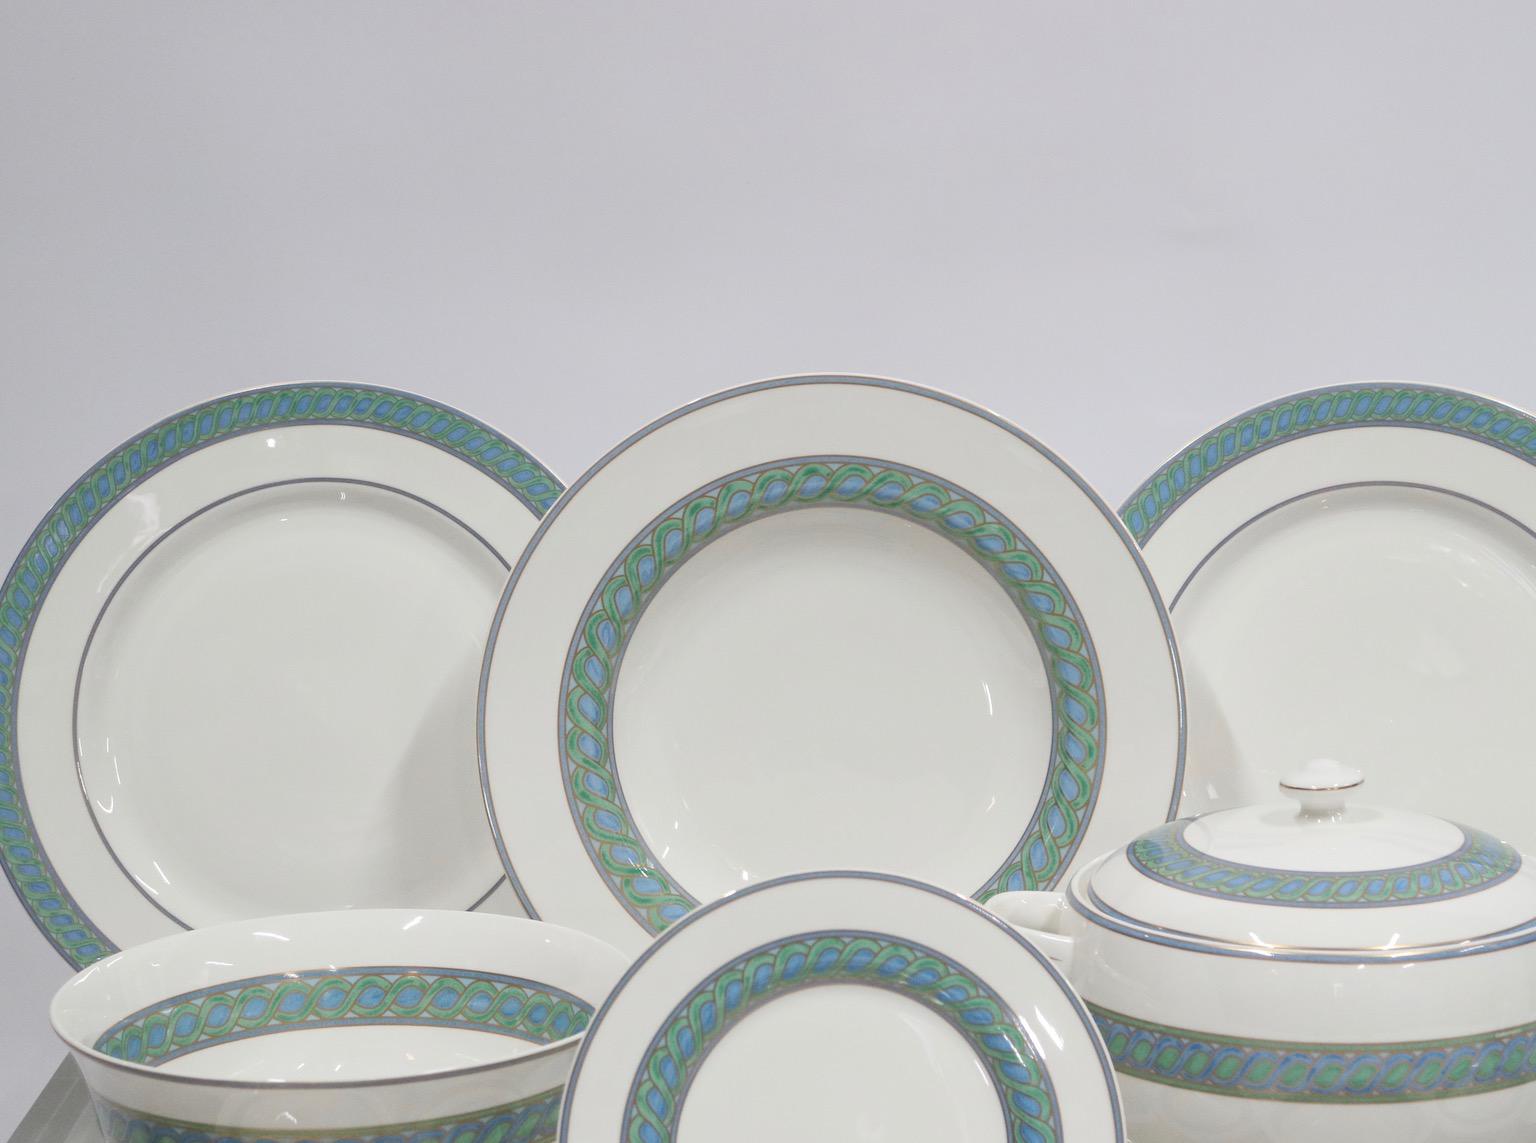 Never used partial service of Christofle porcelain servewear in the blue and green Torsada pattern. The set consists of 43 pieces, serves six people and is in like new condition with almost all pieces having their original box and packaging. This